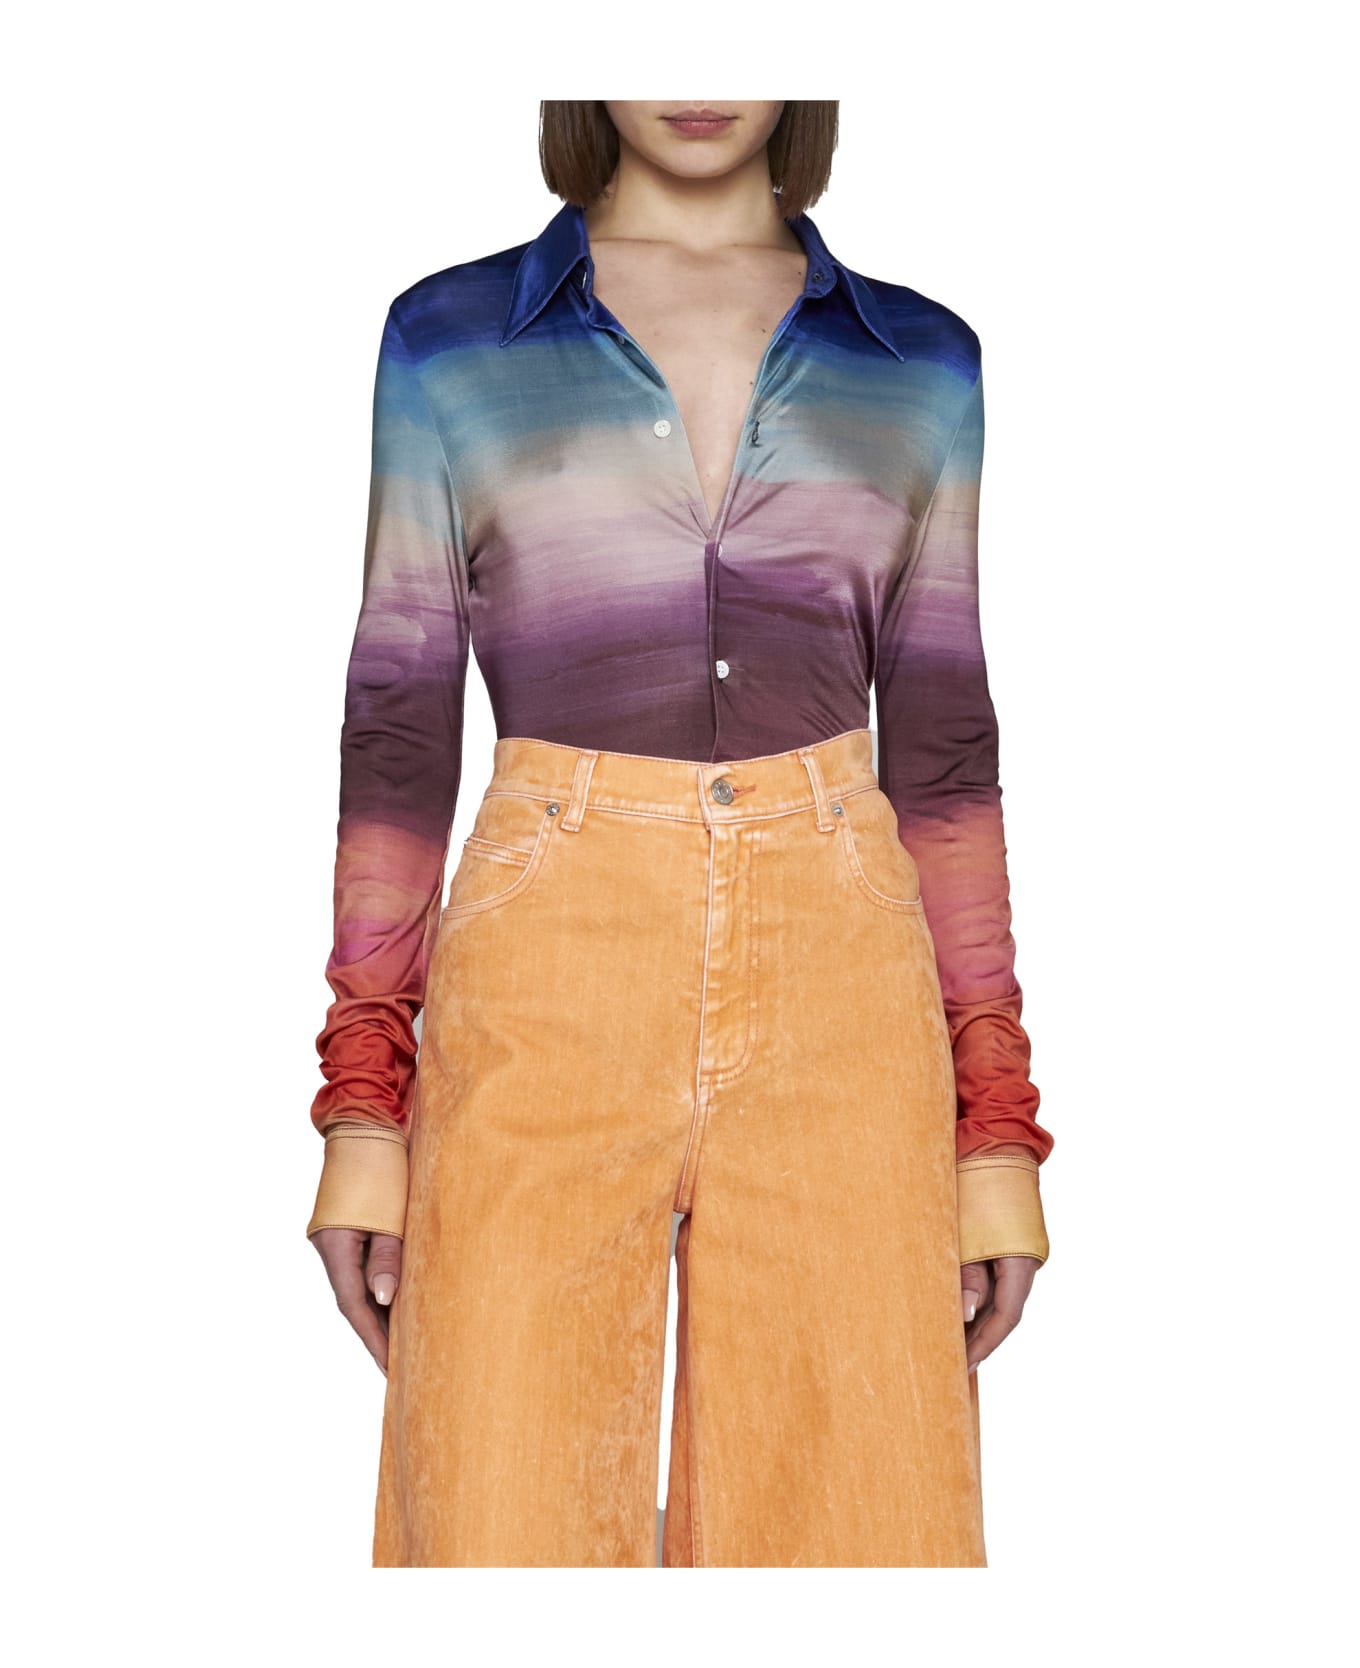 Marni Multicoloured Jersey Shirt With Dark Side Of The Moon Print - MULTICOLORE